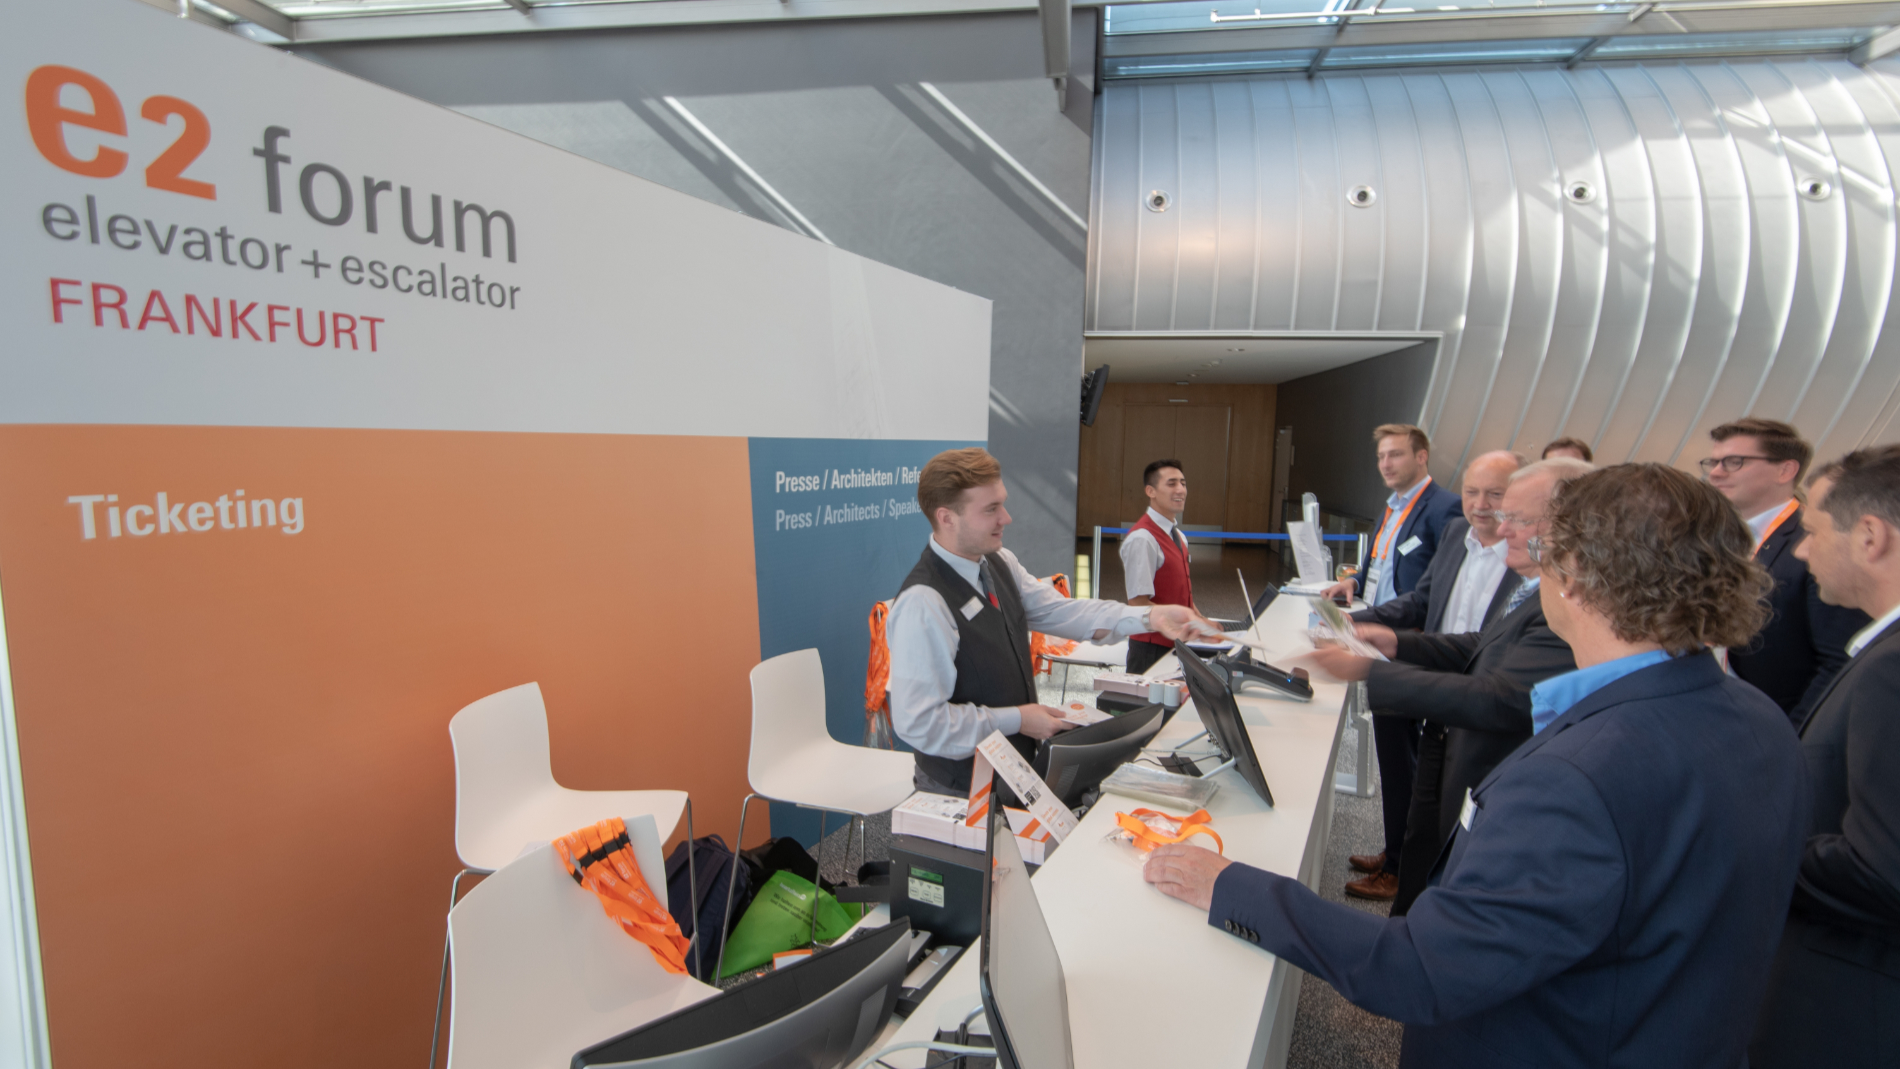 The E2 Forum Frankfurt will take place on 21 and 22 September 2022: the innovation forum for escalator and escalator technology – a place for dialogue between system operators, building managers and the industry. (Source: Messe Frankfurt I Sandra Gätke)